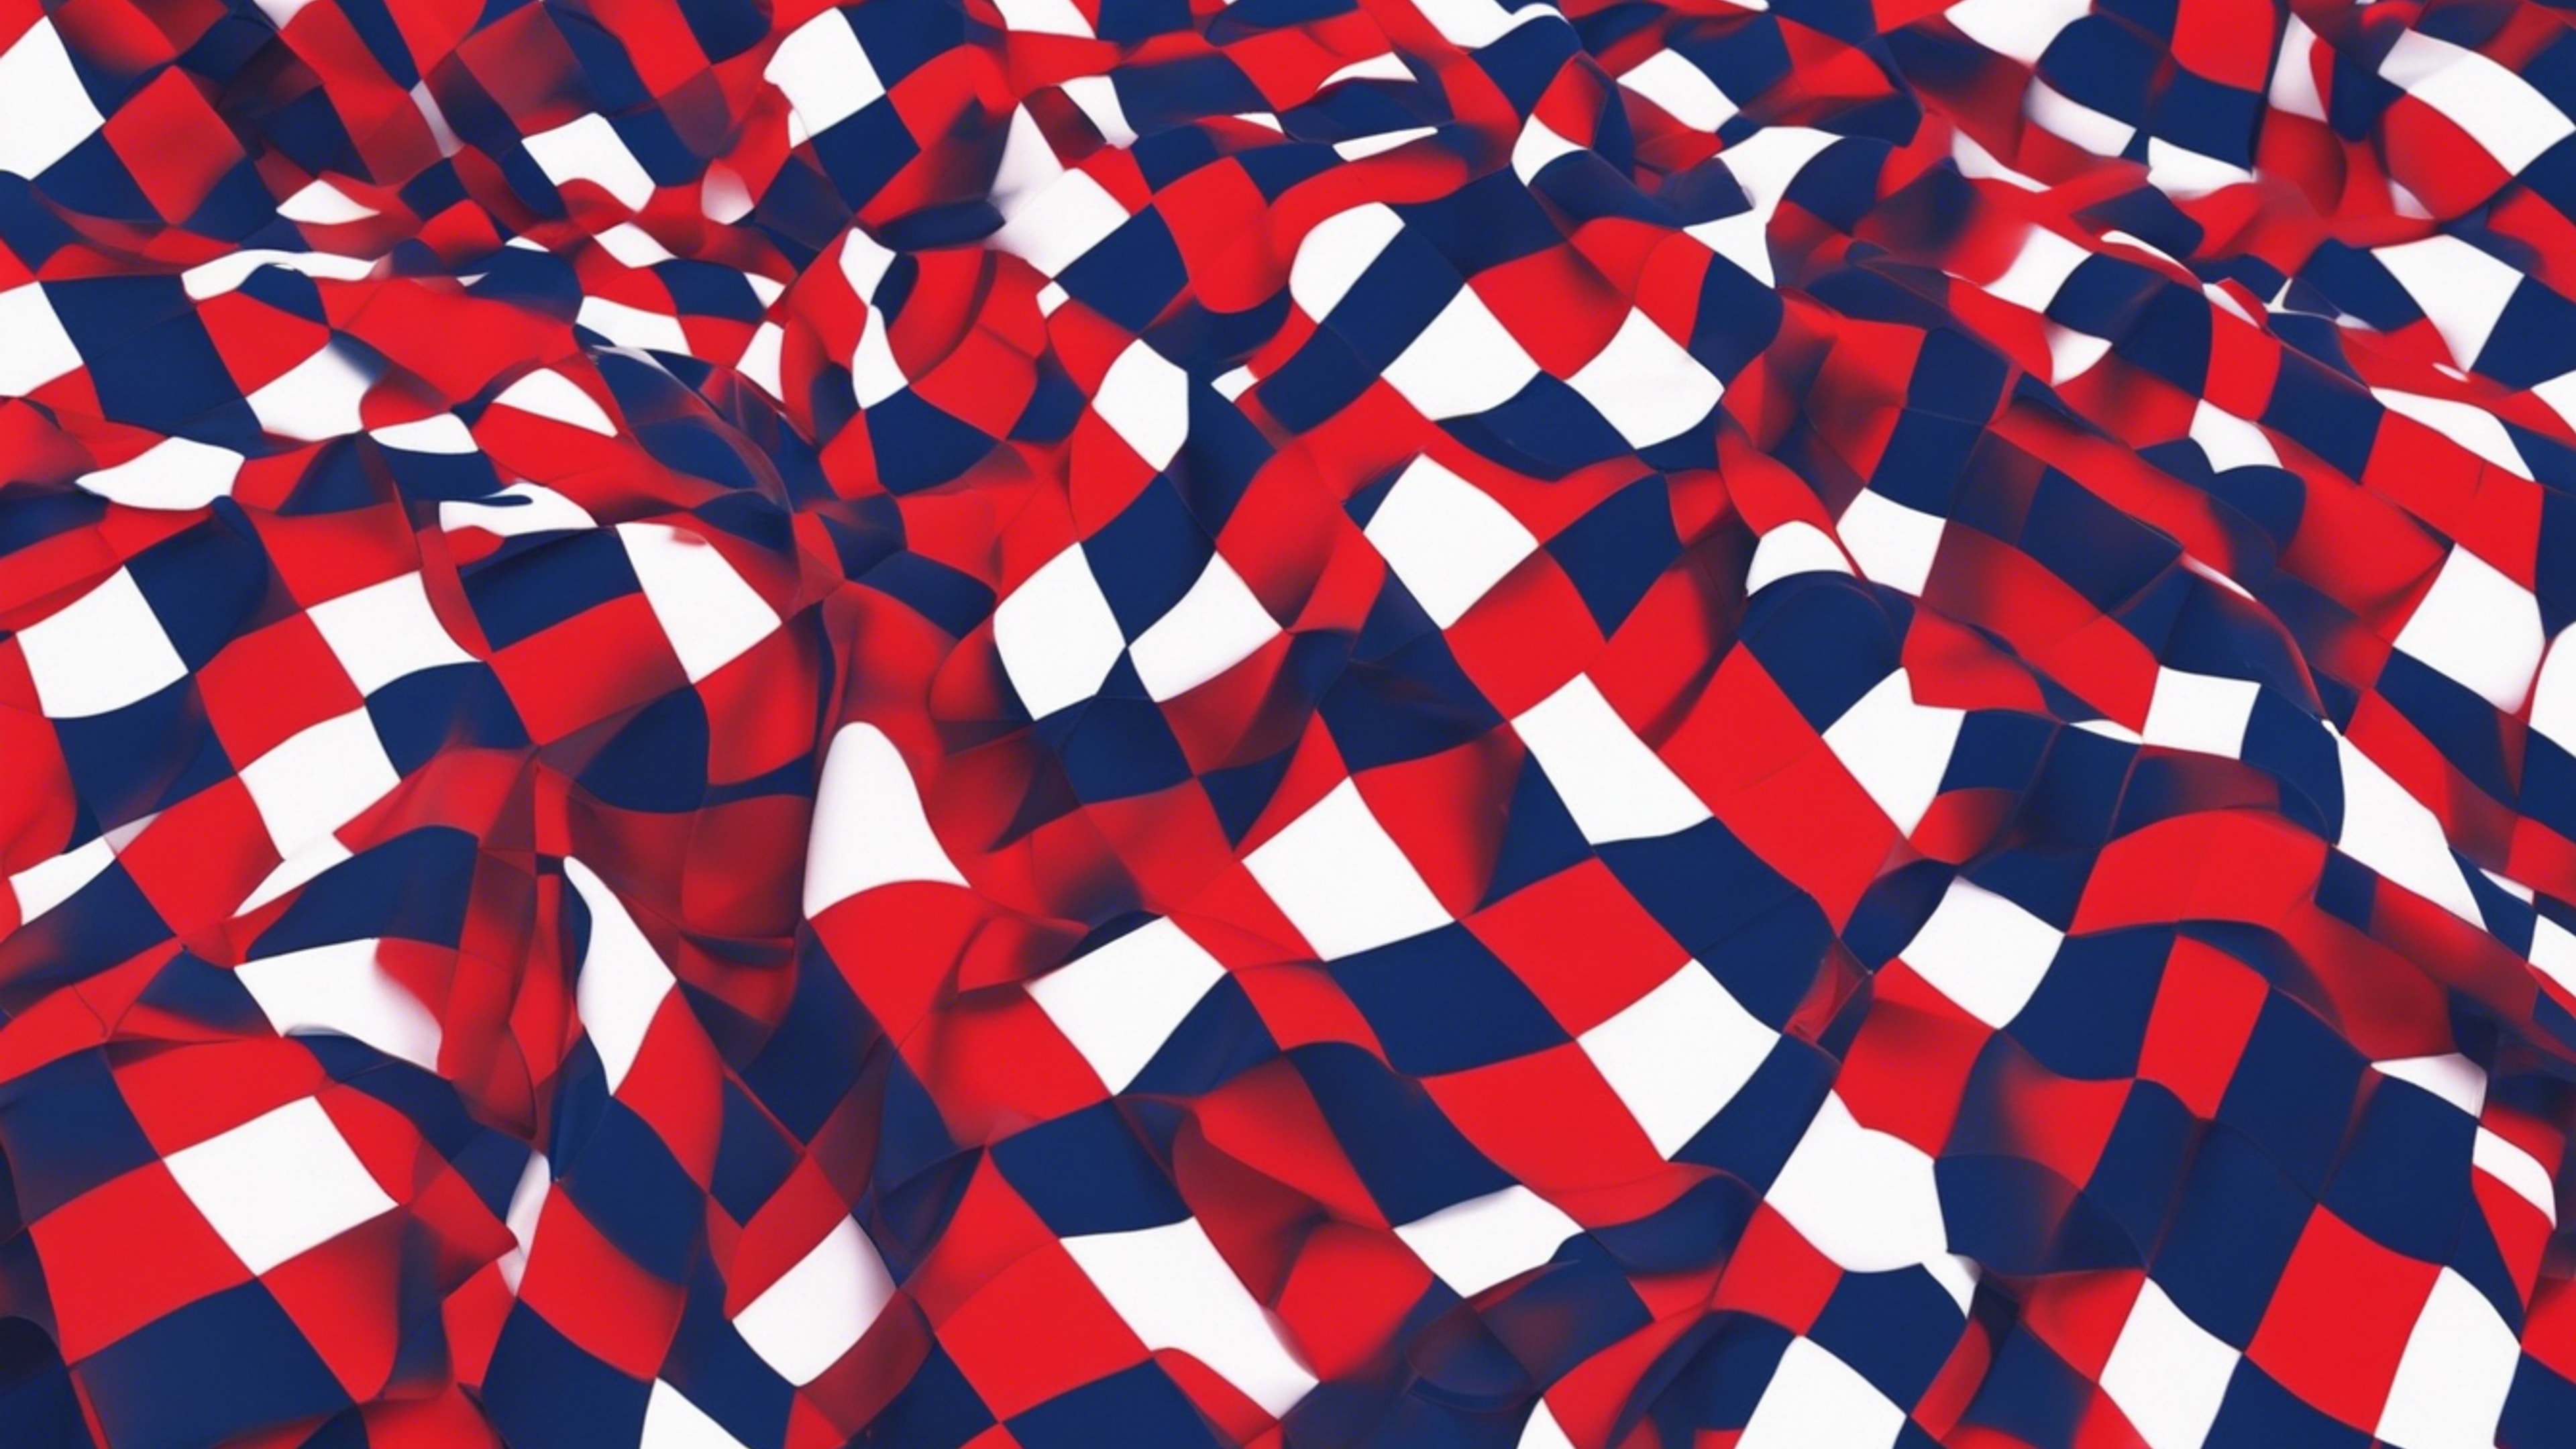 Bright red and navy squares forming a complex checkered pattern. Wallpaper[590a1545db8846568581]